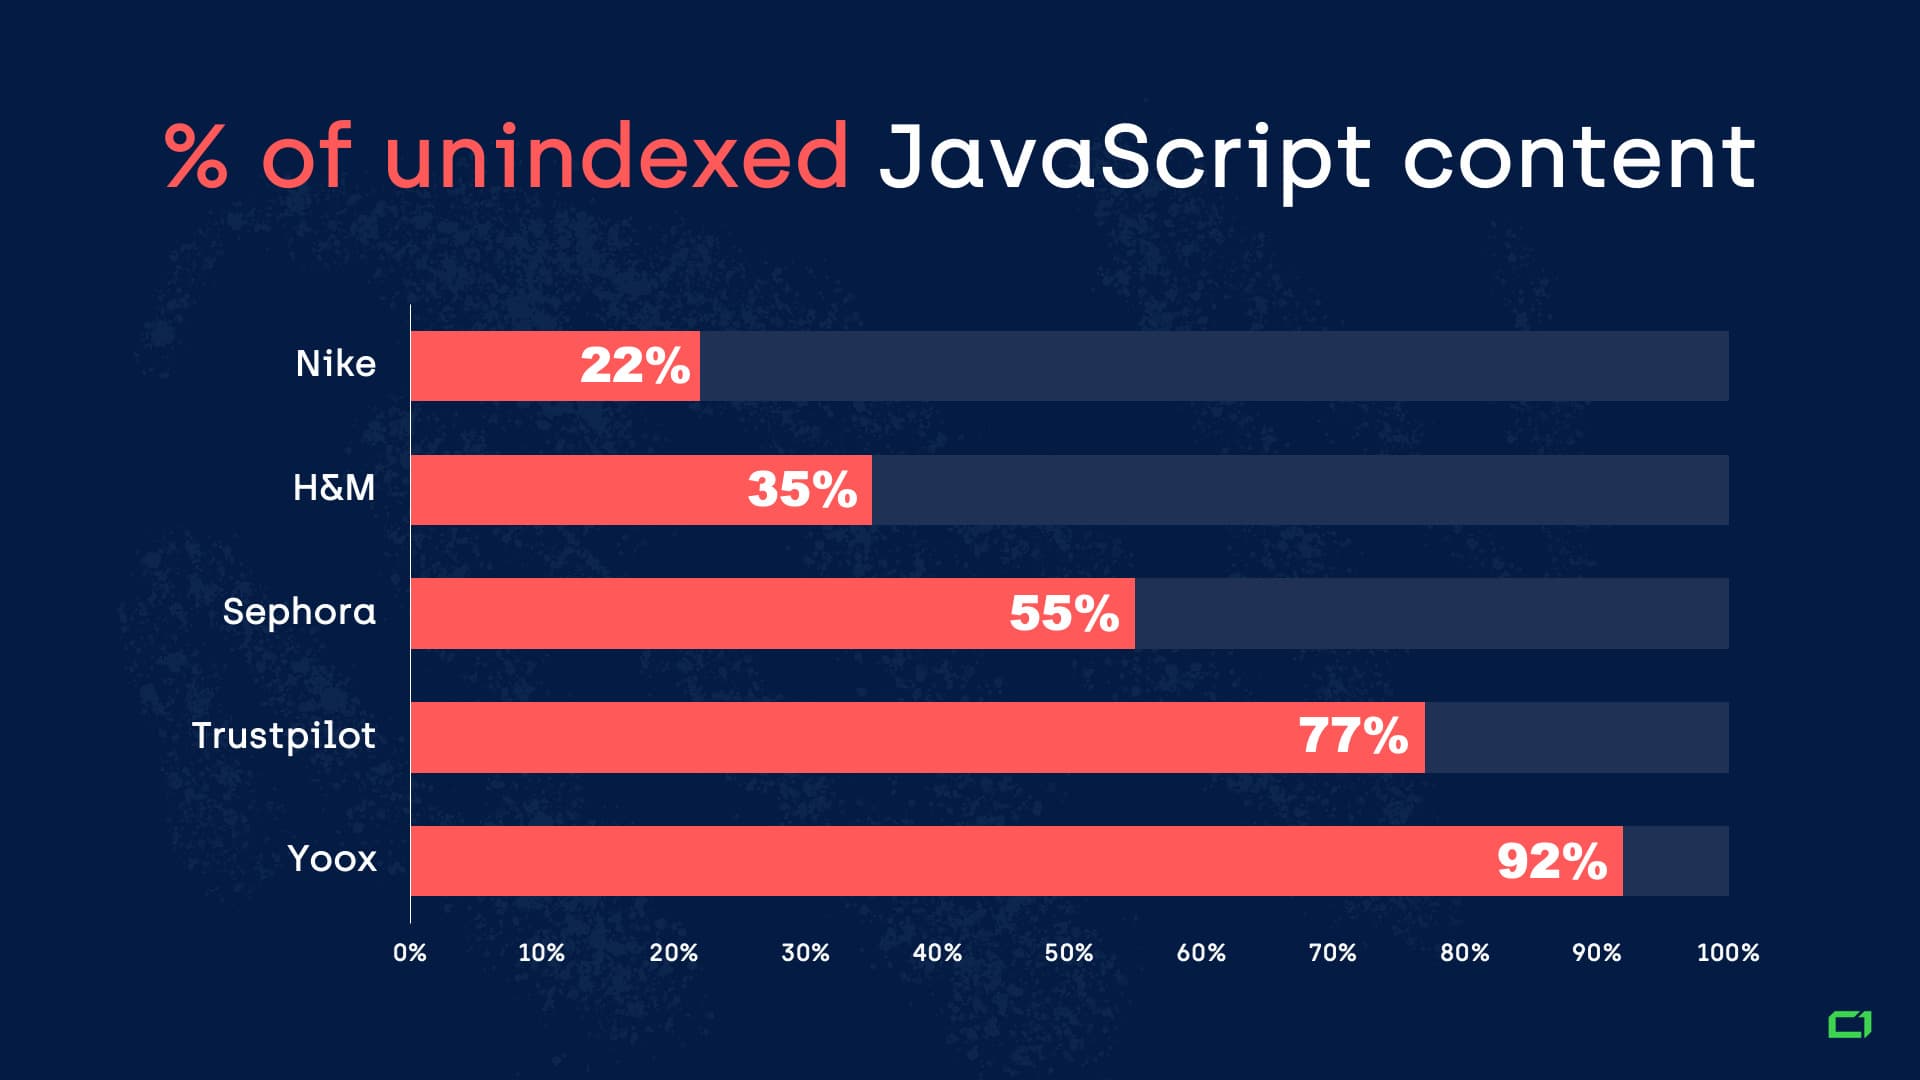 % of unindexed JavaScript content for major brands - Nike, H&M, Sephora, Yoox